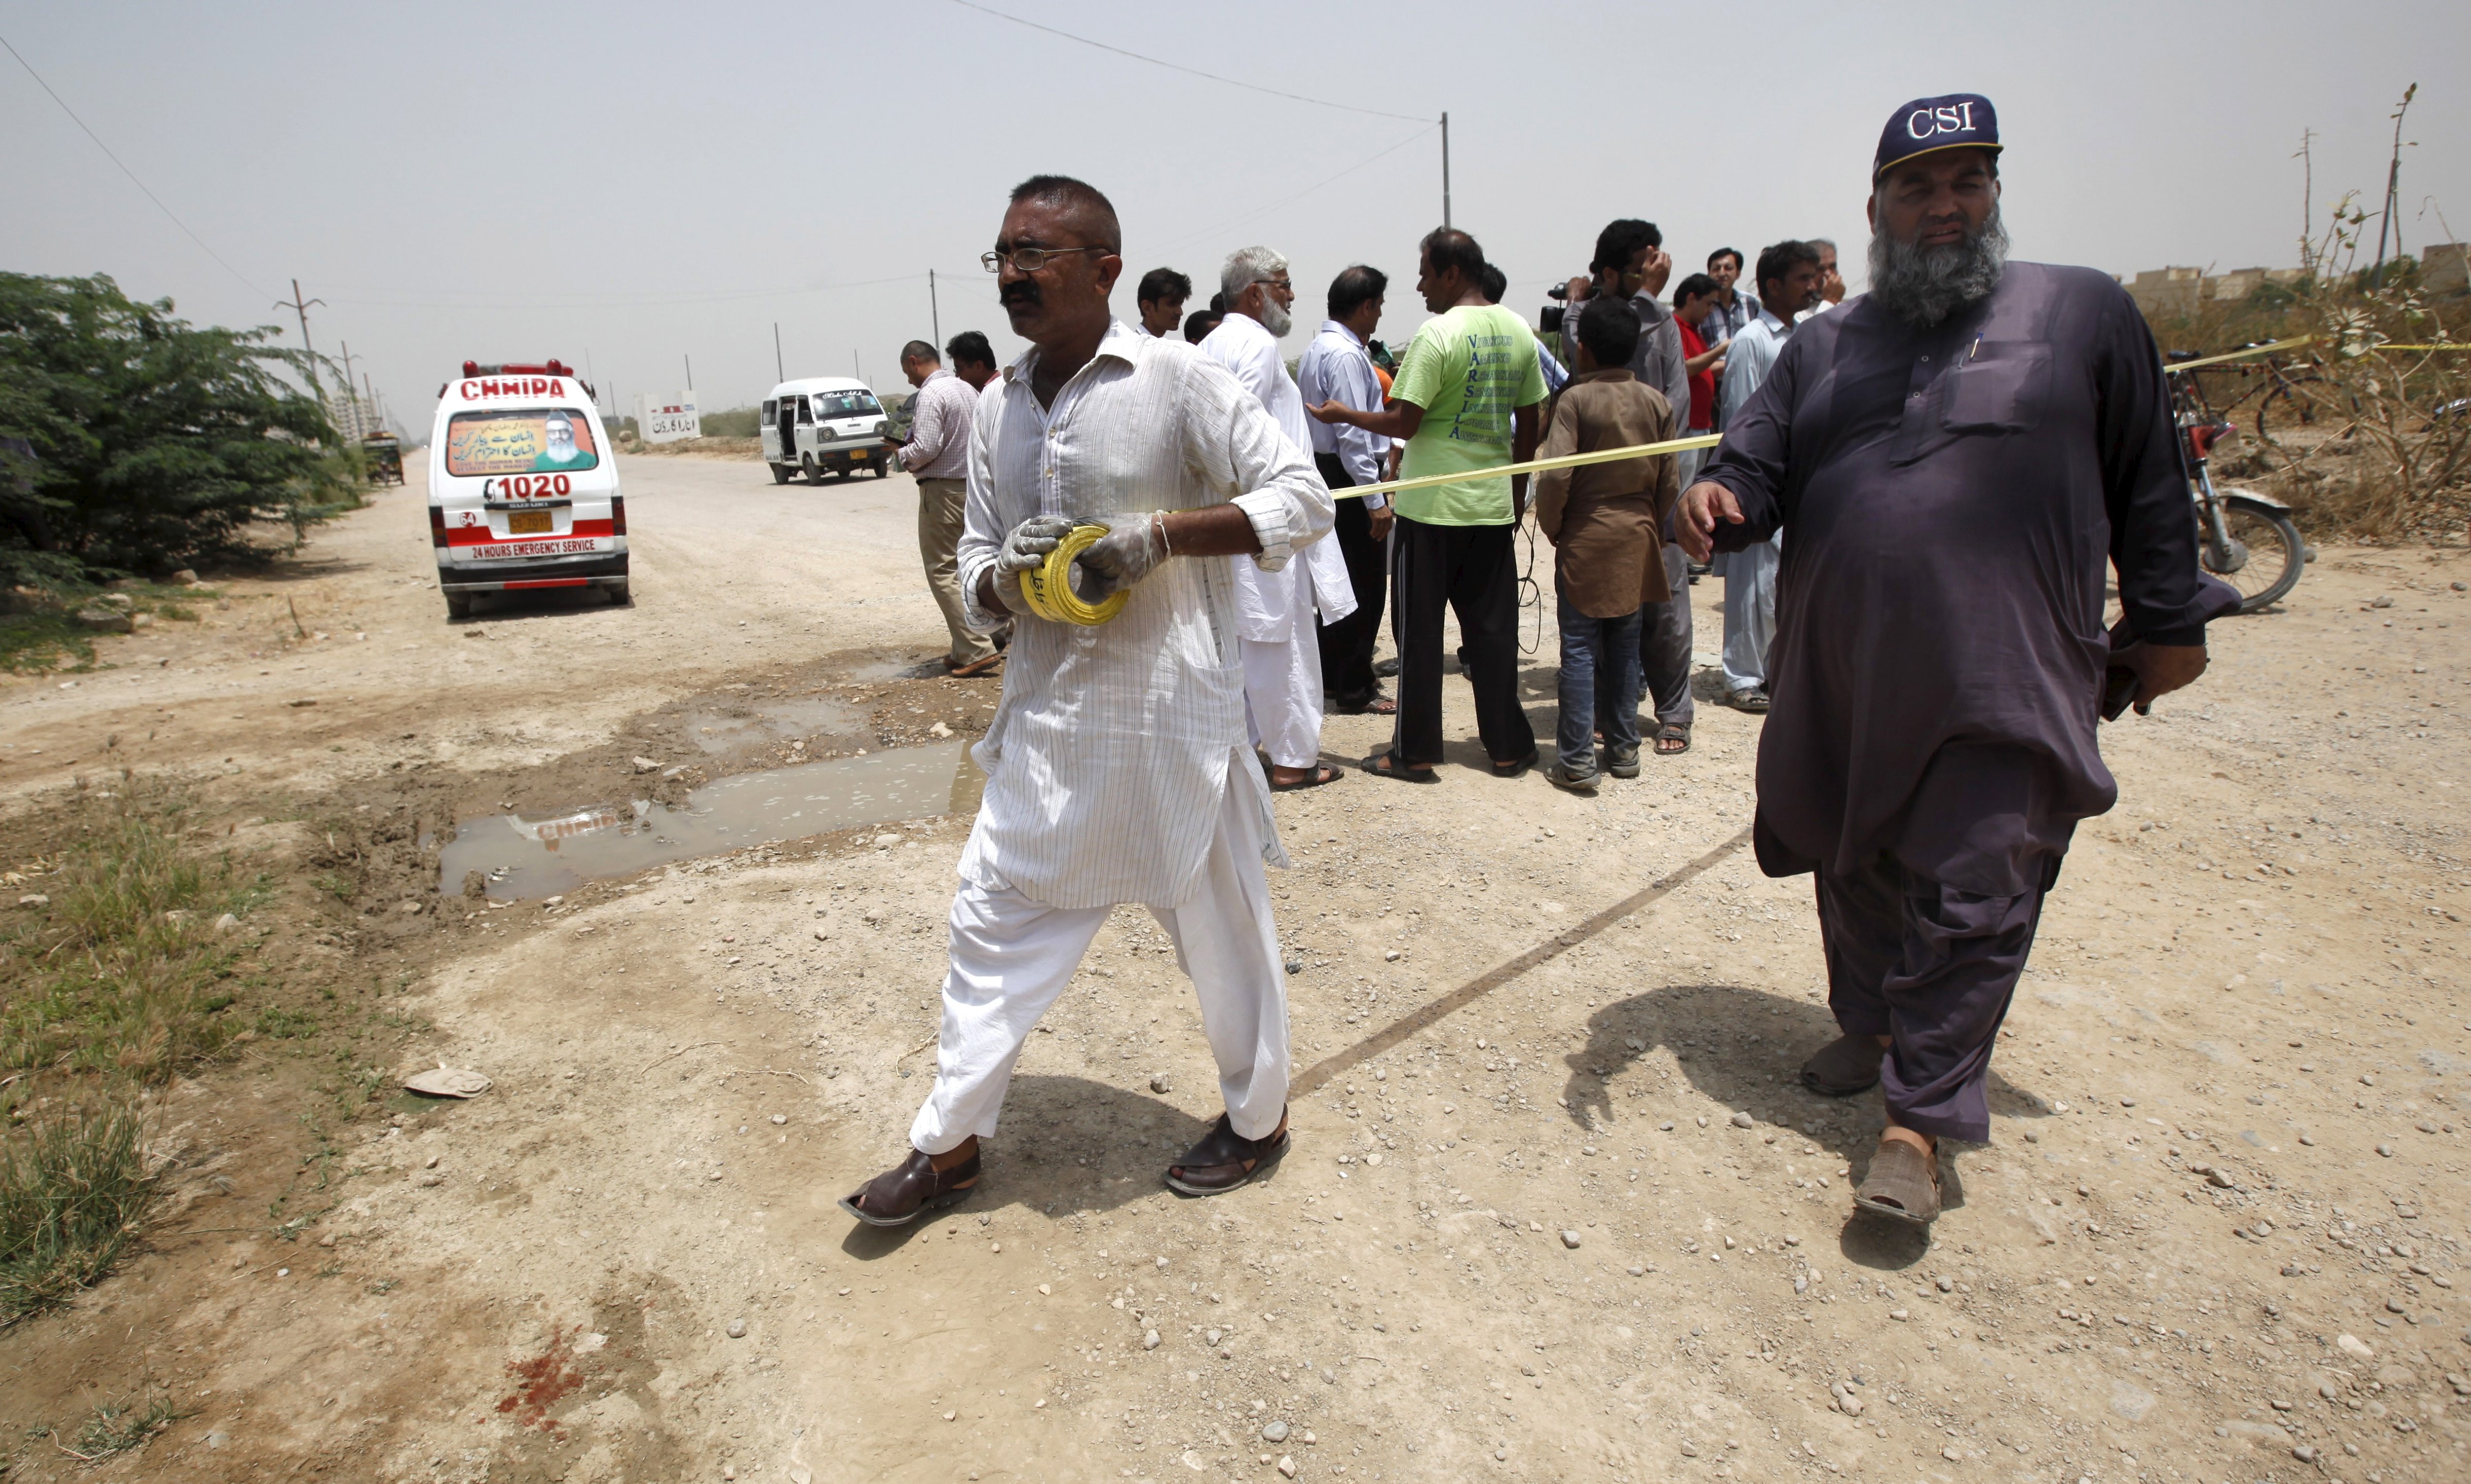 Security officials cordon off the area at the scene of an attack on a bus in Karachi, Pakistan, on May 13, 2015 (Akhtar Soomro—Reuters)